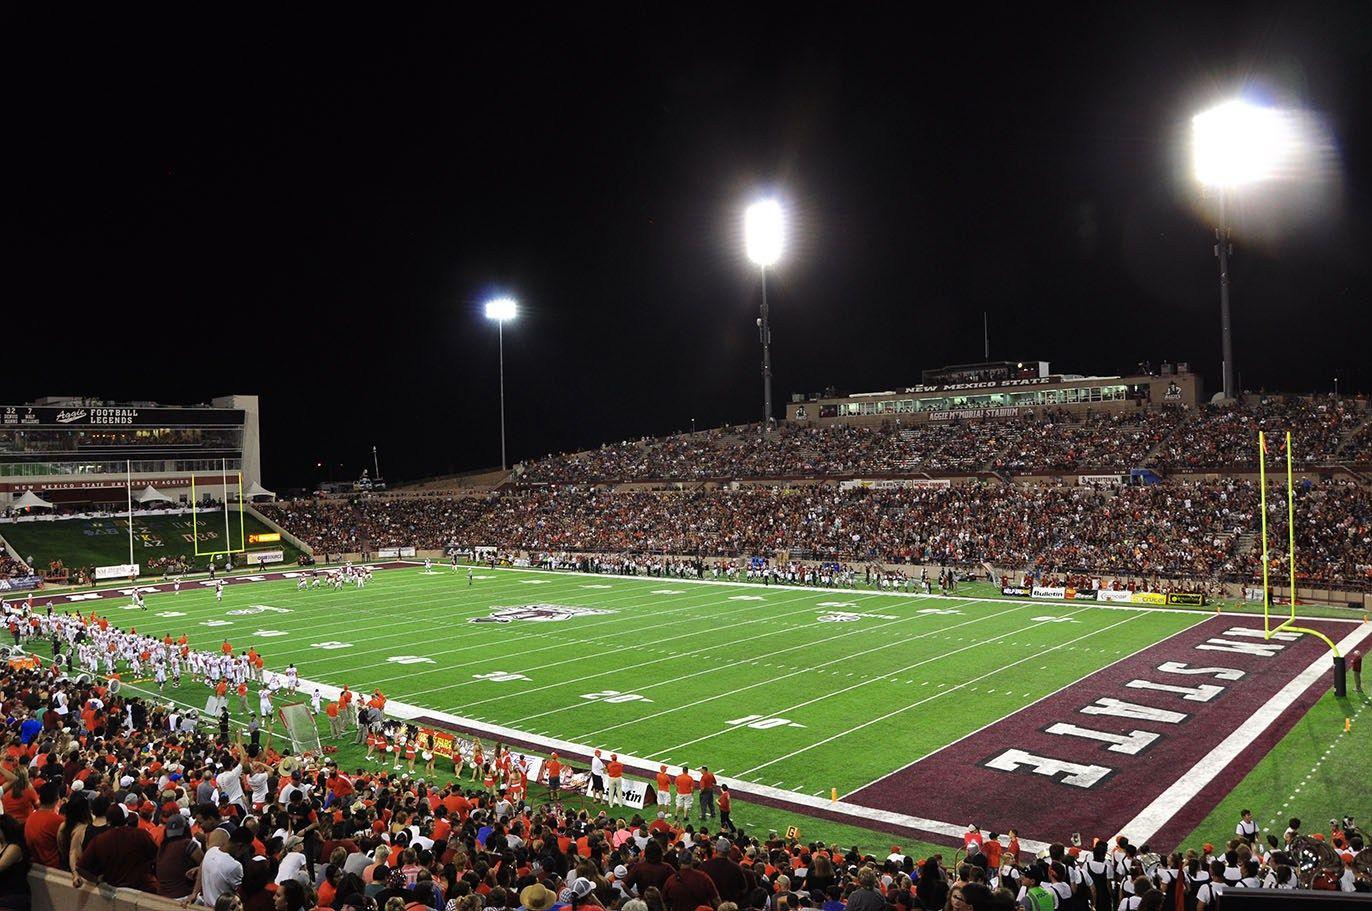 New Mexico State is an interesting idea but ignores the real